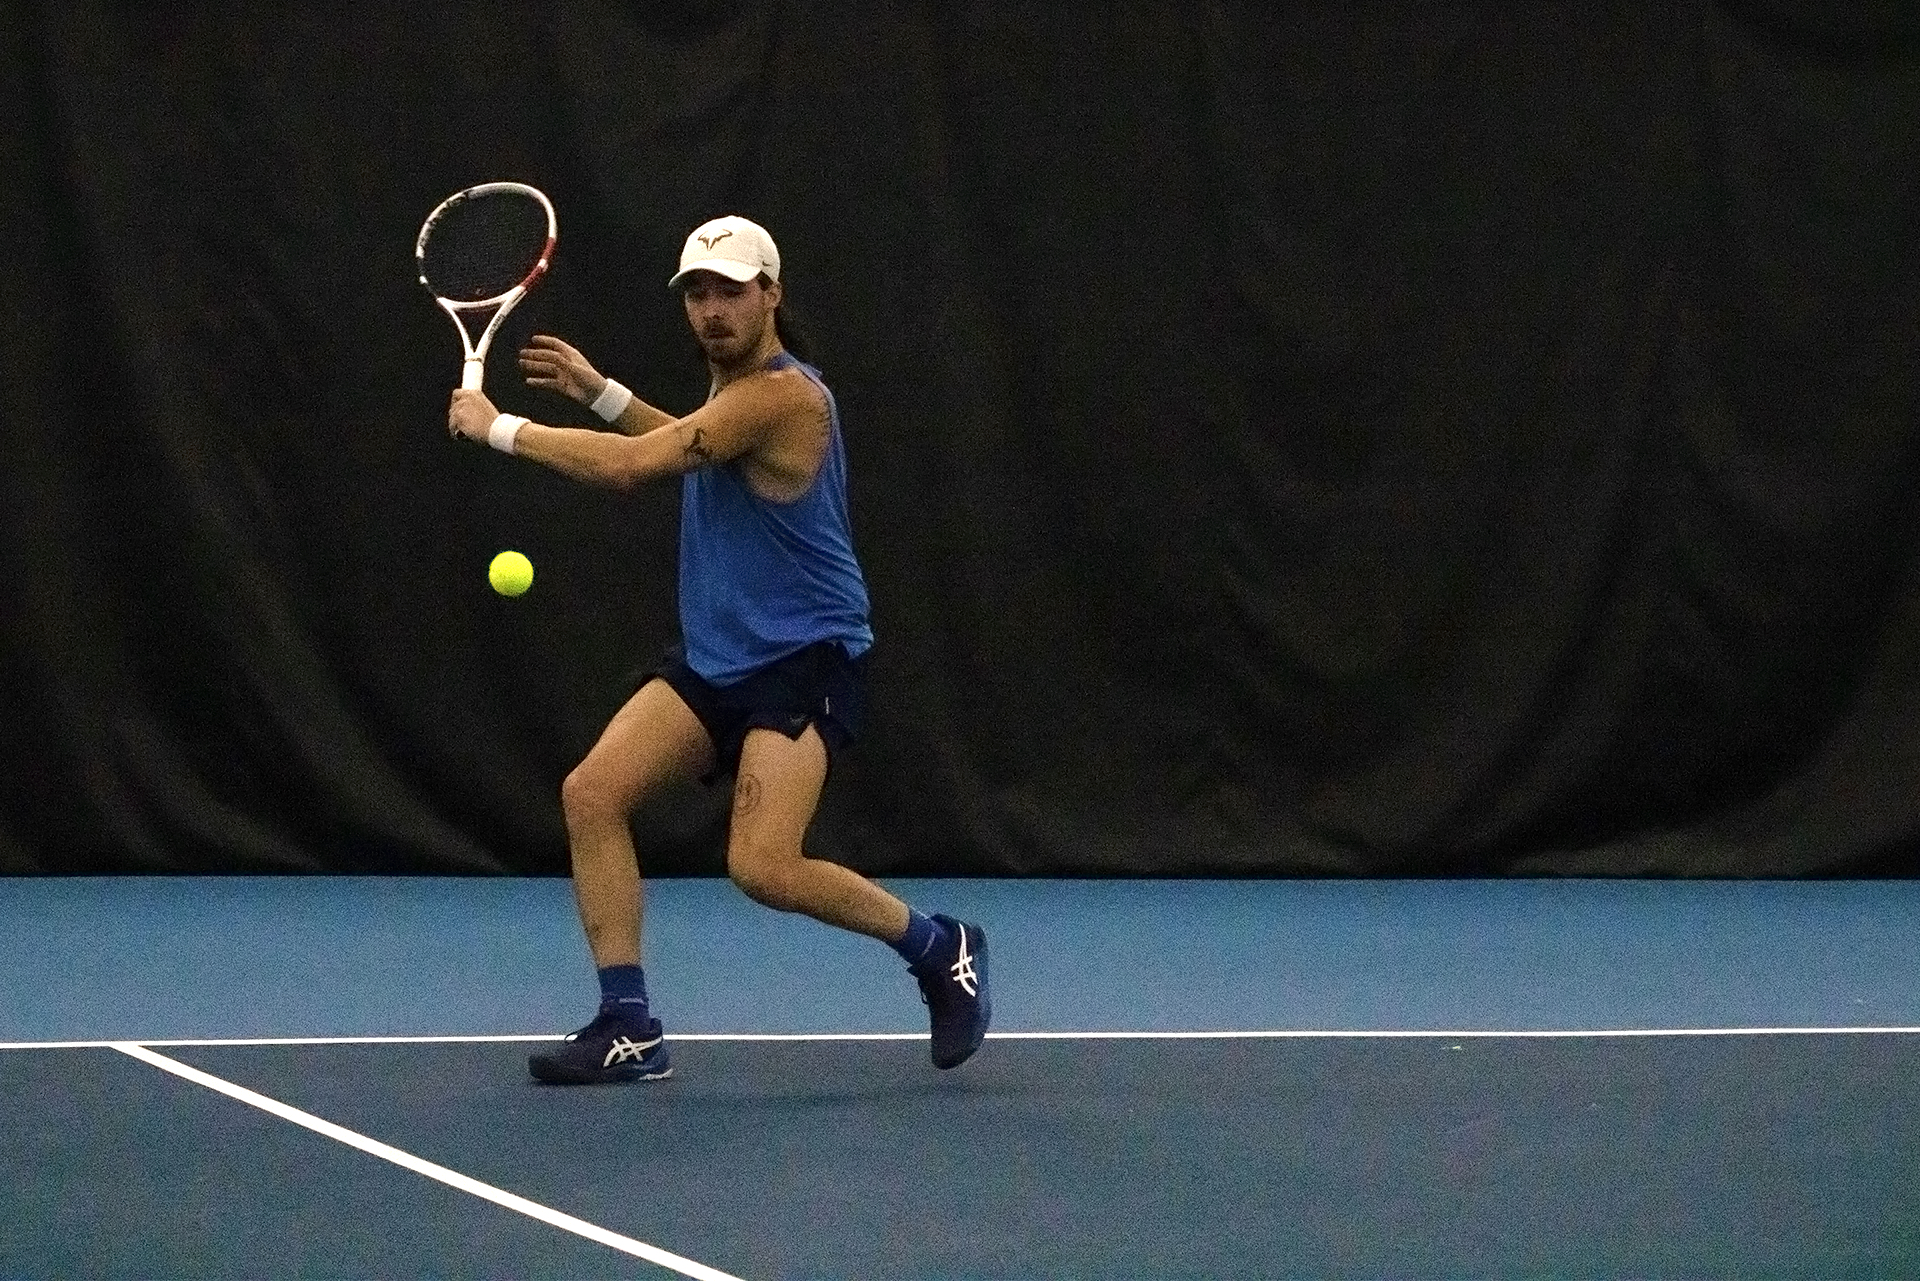 Alec Brideau hitting his patented two-handed backhand